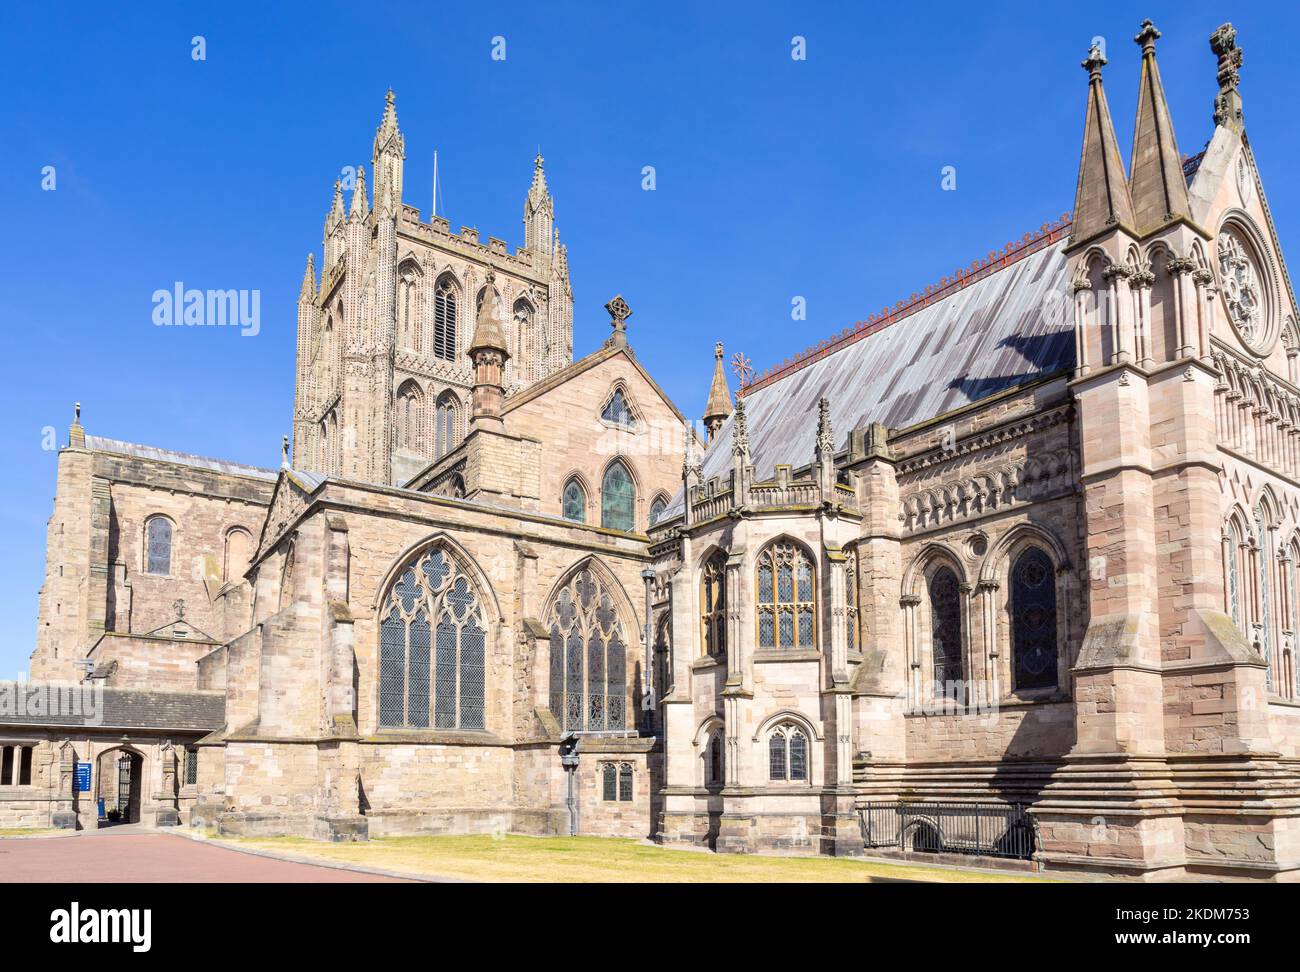 Hereford cathedral Hereford Herefordshire England UK GB Europe Stock Photo